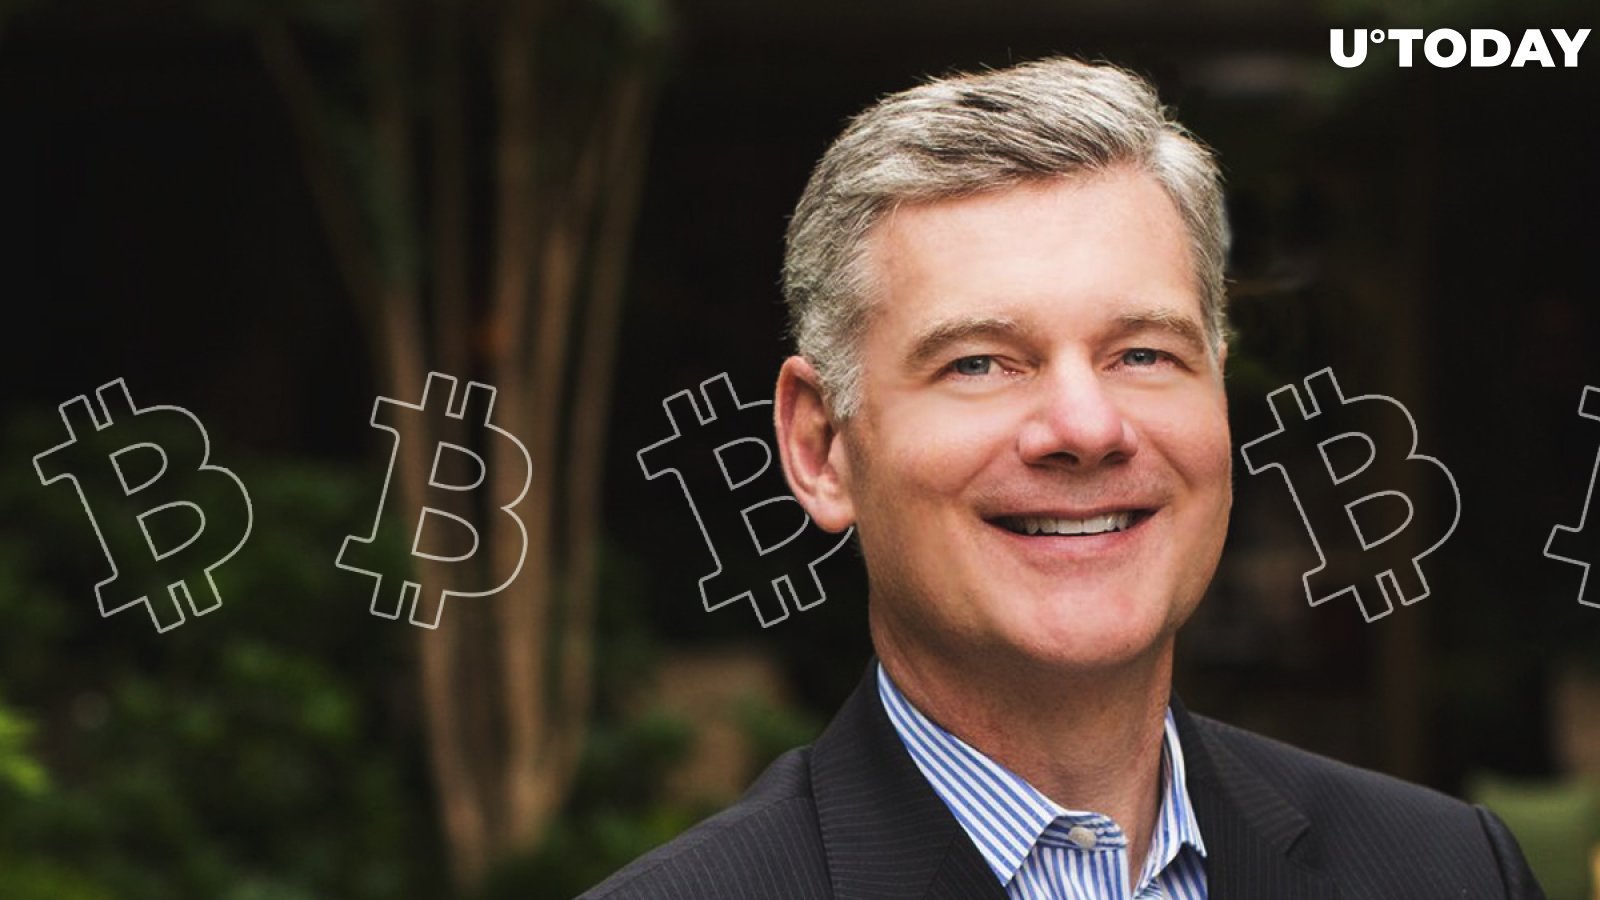 Bitcoin Haters Need to Put Their Money Where Their Mouth Is, Says Morgan Creek CEO Mark Yusko 